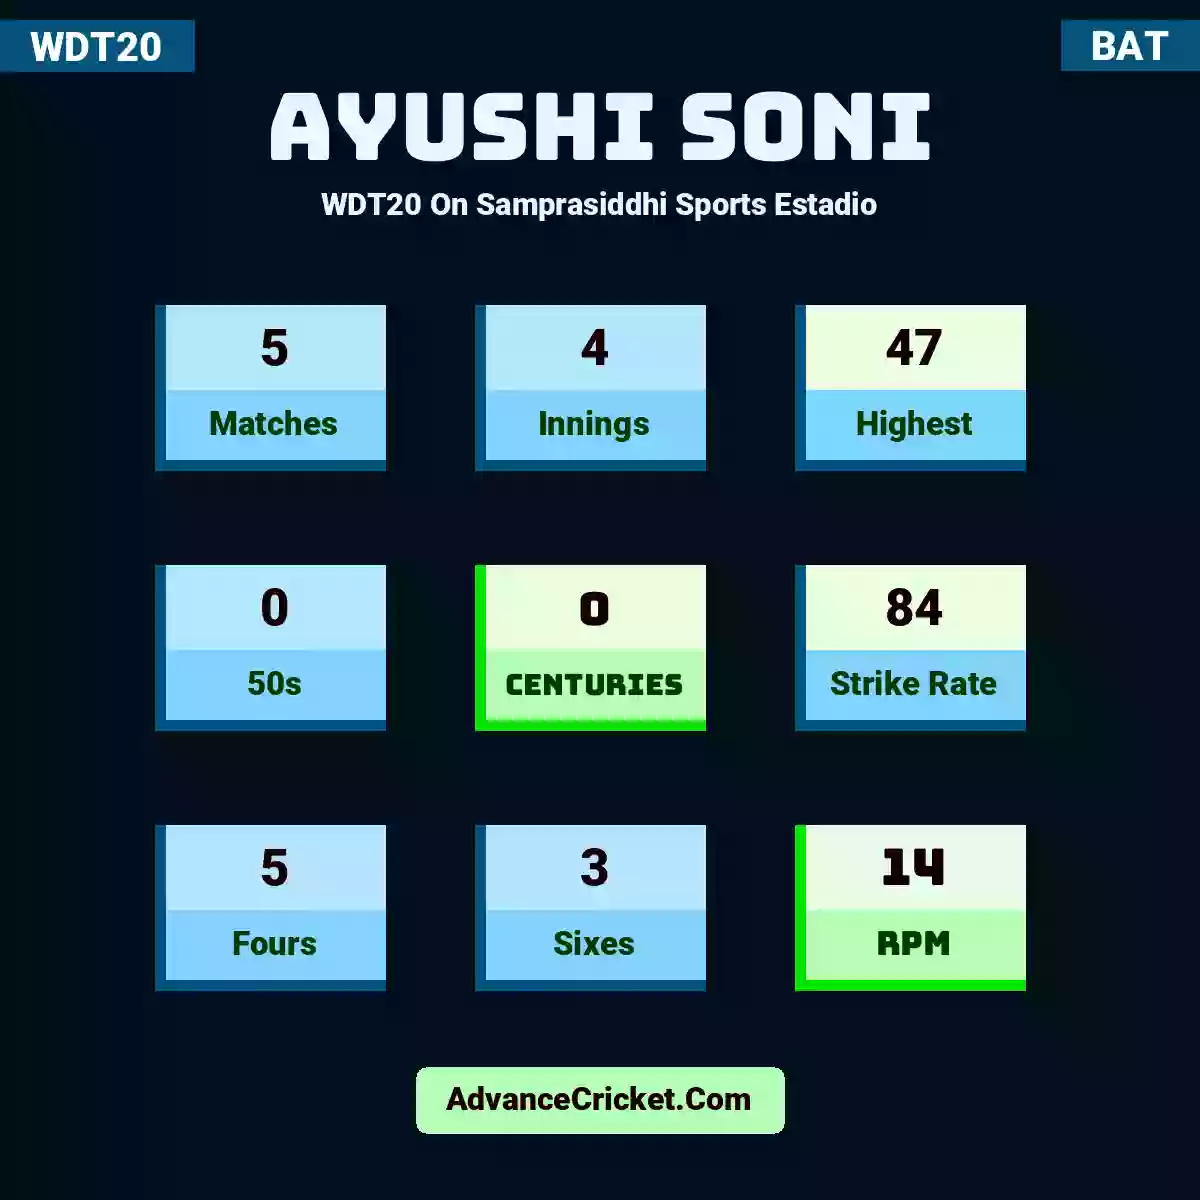 Ayushi soni WDT20  On Samprasiddhi Sports Estadio, Ayushi soni played 5 matches, scored 47 runs as highest, 0 half-centuries, and 0 centuries, with a strike rate of 84. Ay.soni hit 5 fours and 3 sixes, with an RPM of 14.